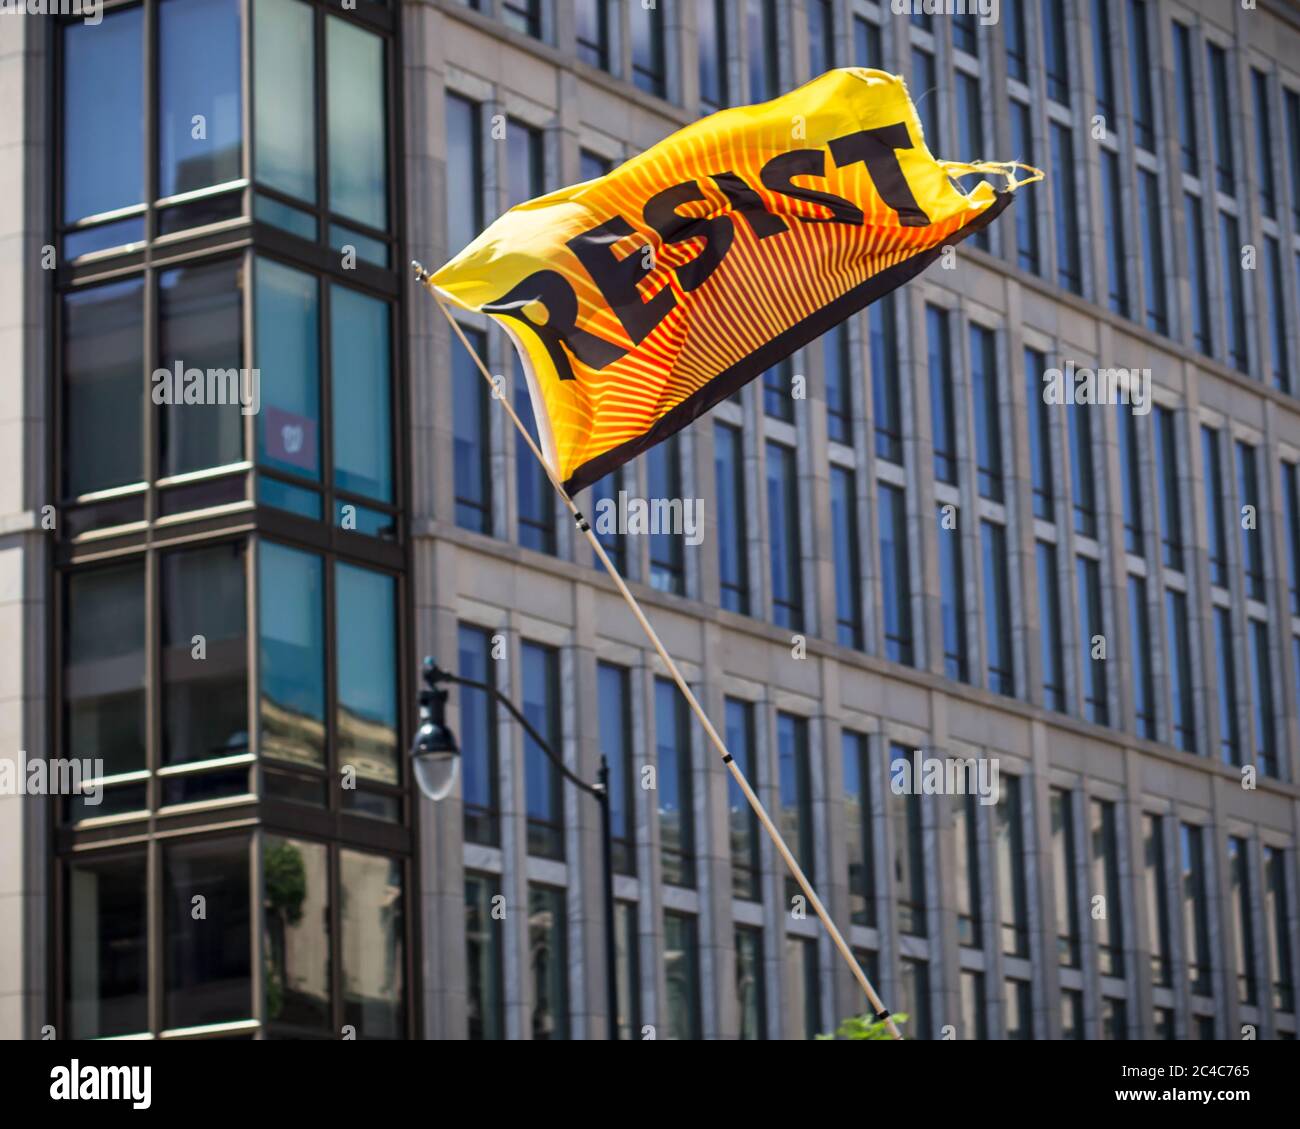 Protestors and protest signs at the Black Lives Matter protest in Washington, DC in June 2020 Stock Photo